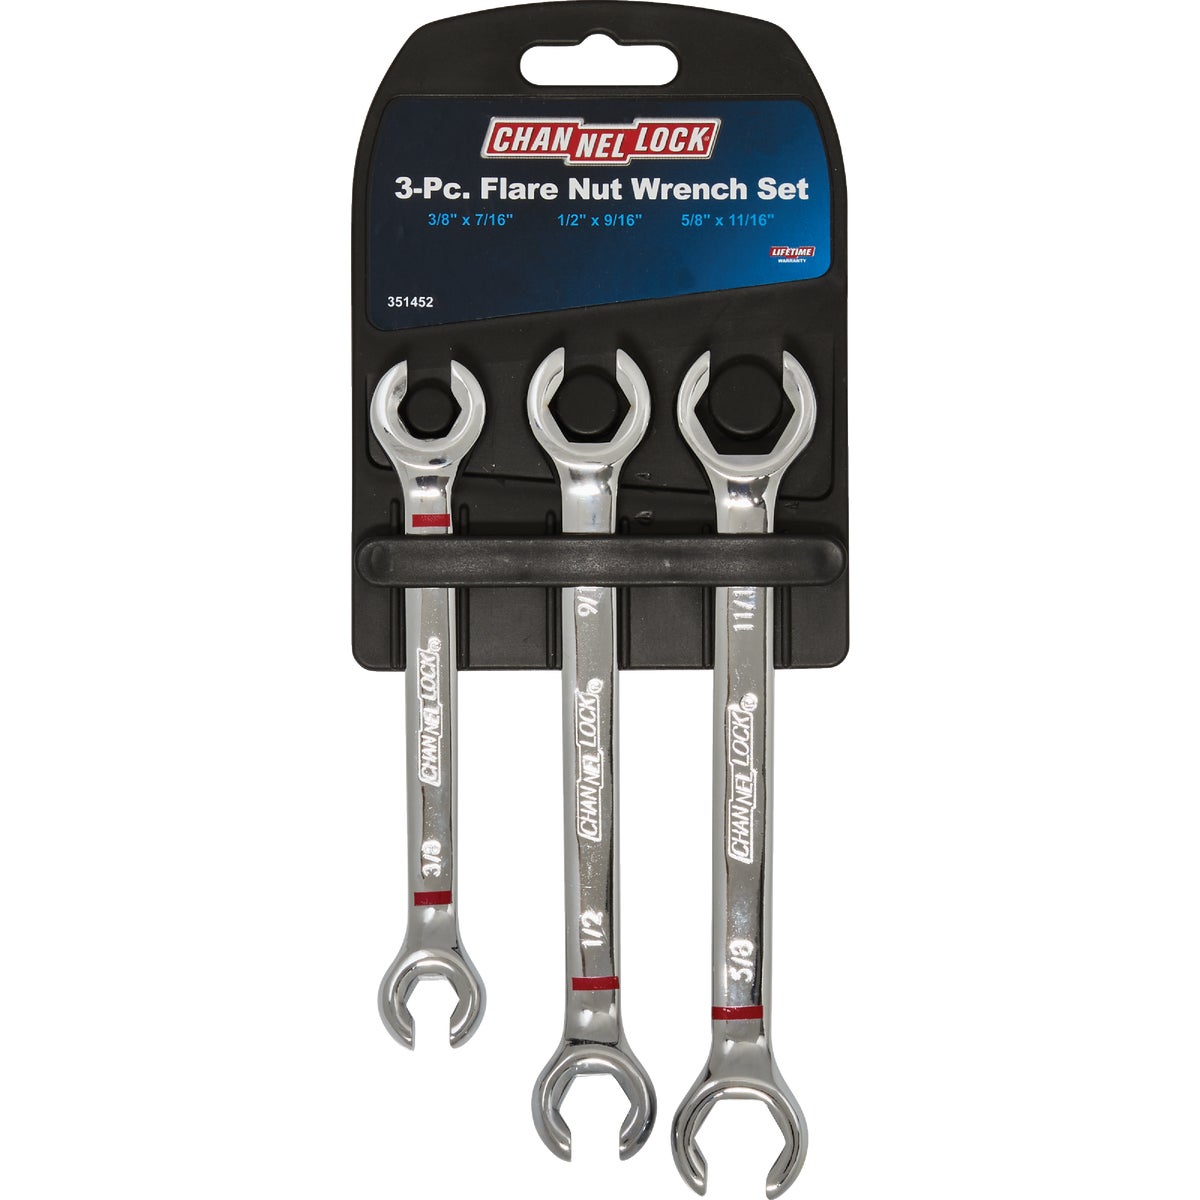 Channellock Standard 6-Point Flare Nut Wrench Set (3-Piece)